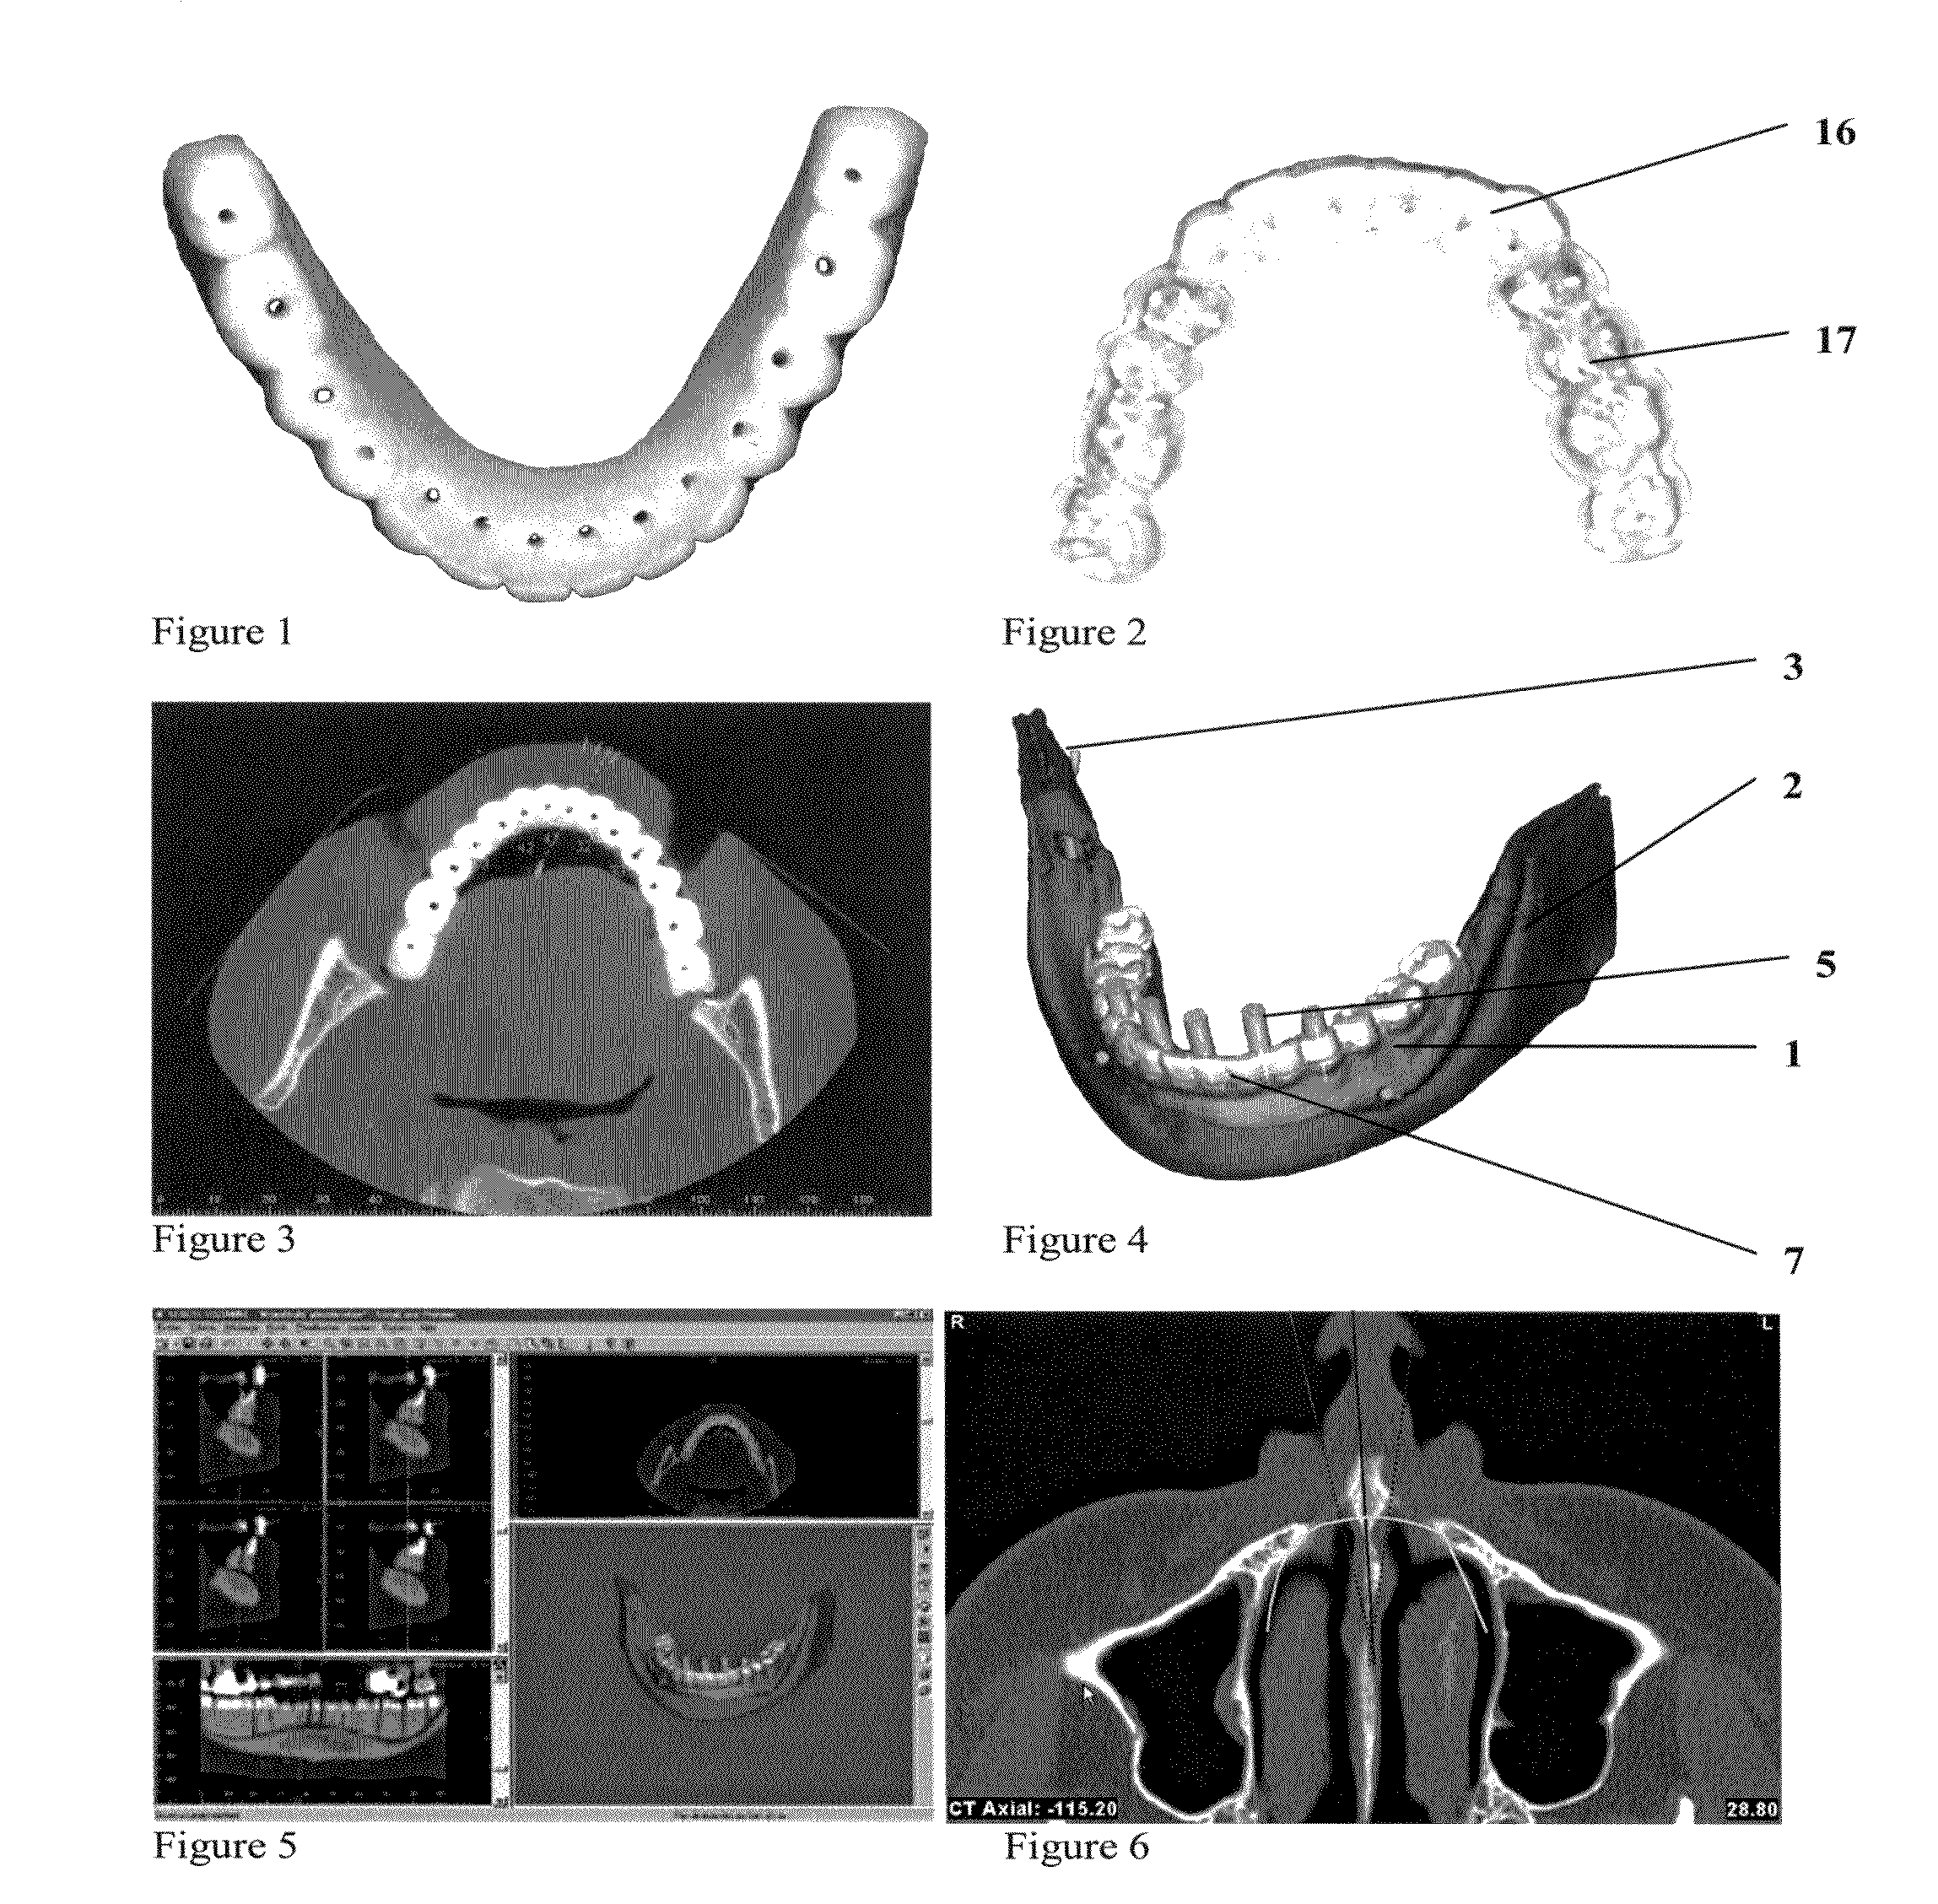 Method for (semi-) automatic dental implant planning